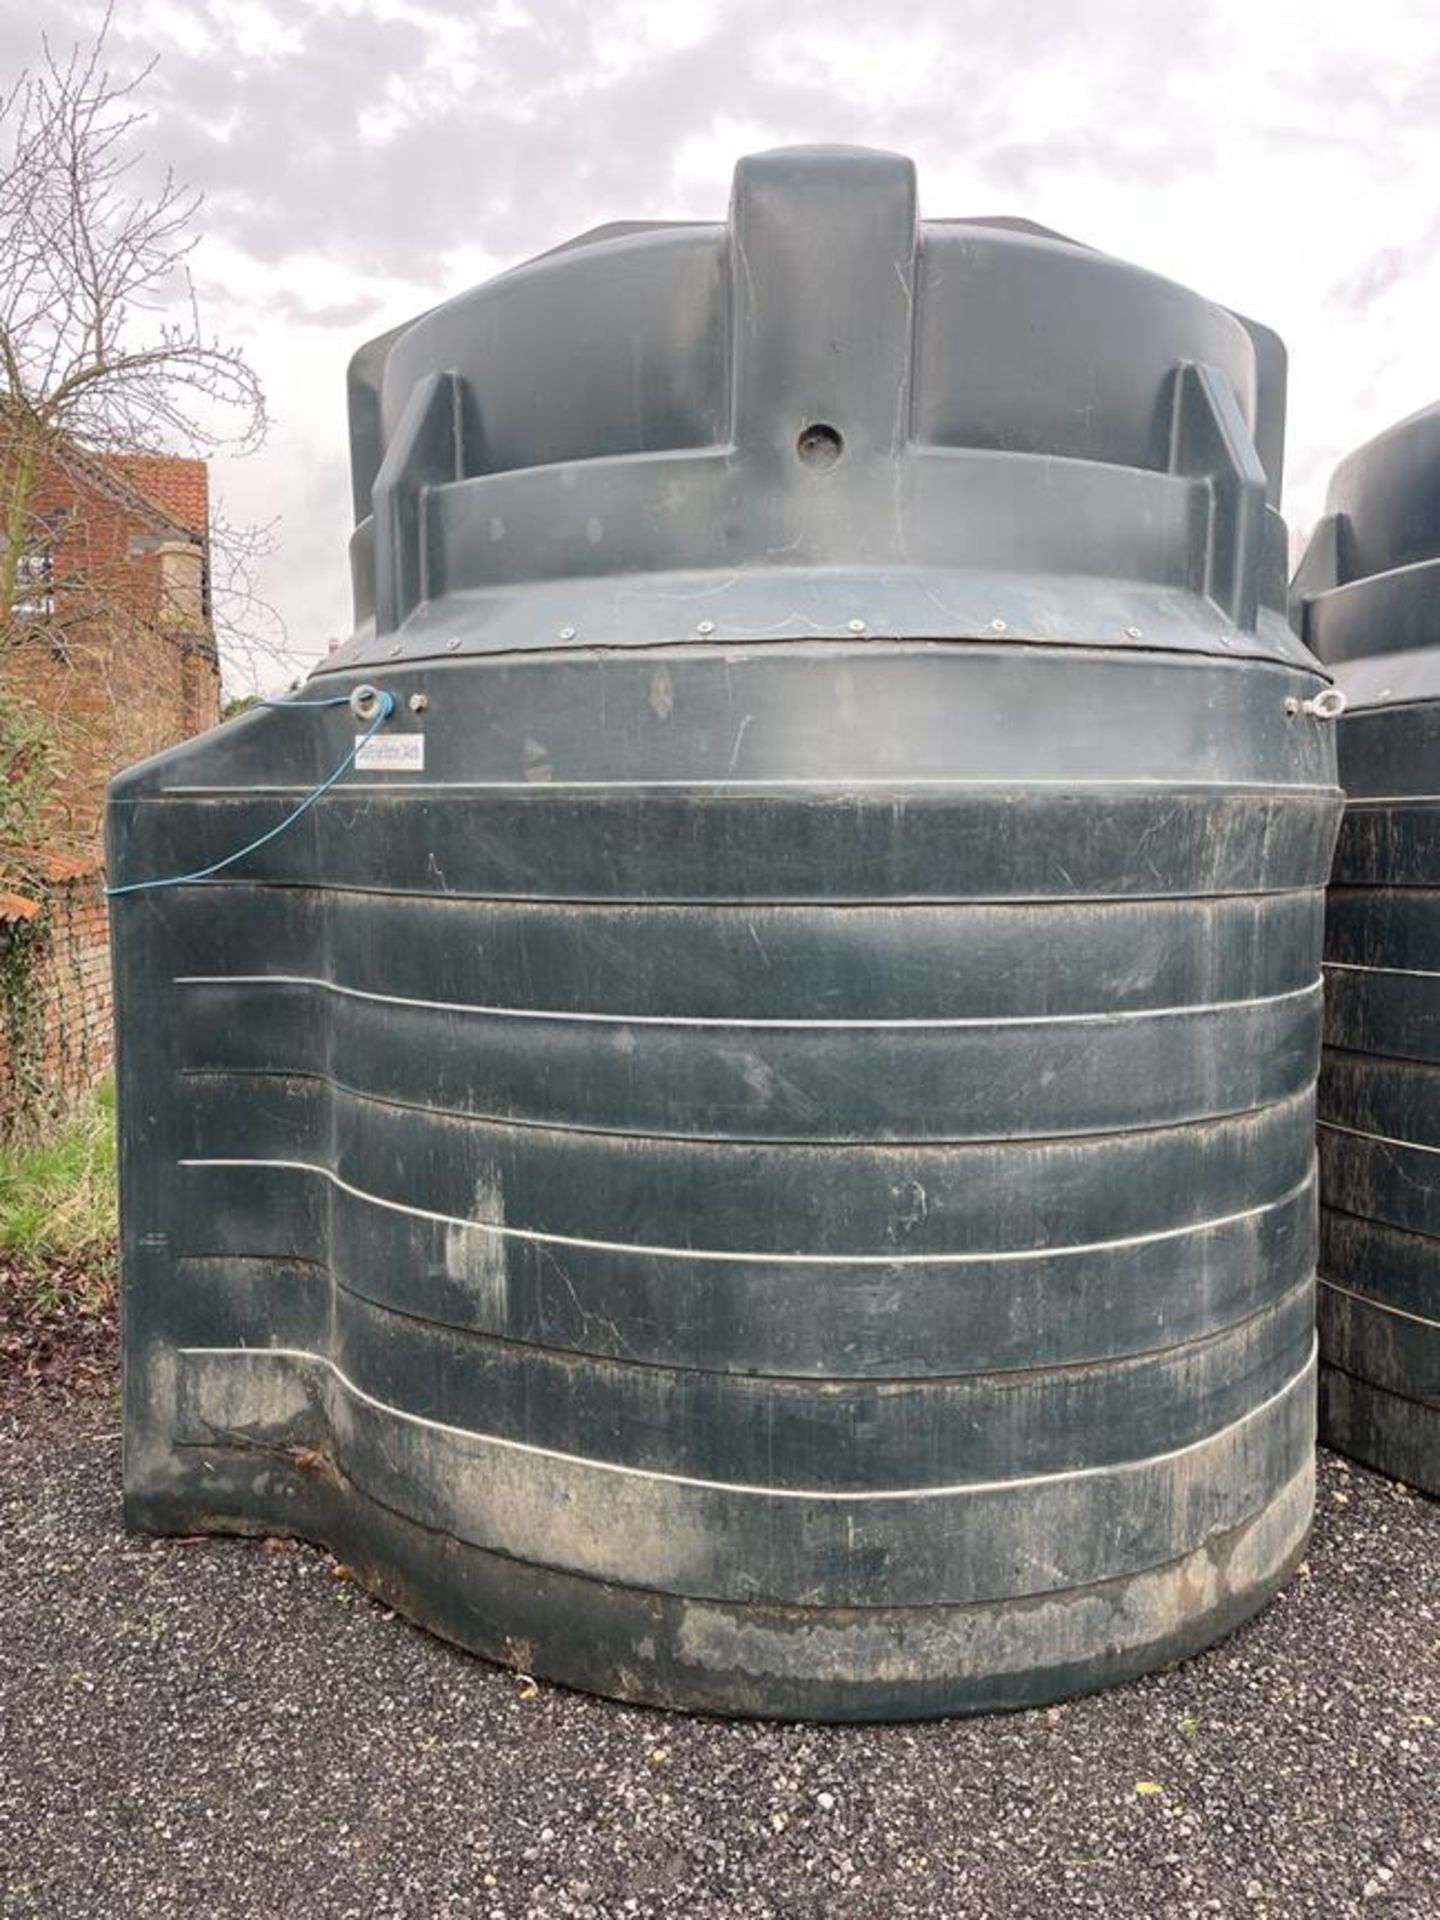 2009 Harlequin 10,000 Litre Bunded Fuel Tank, S/No. 5331, 3250x2800x3350mm fitted with Piusi